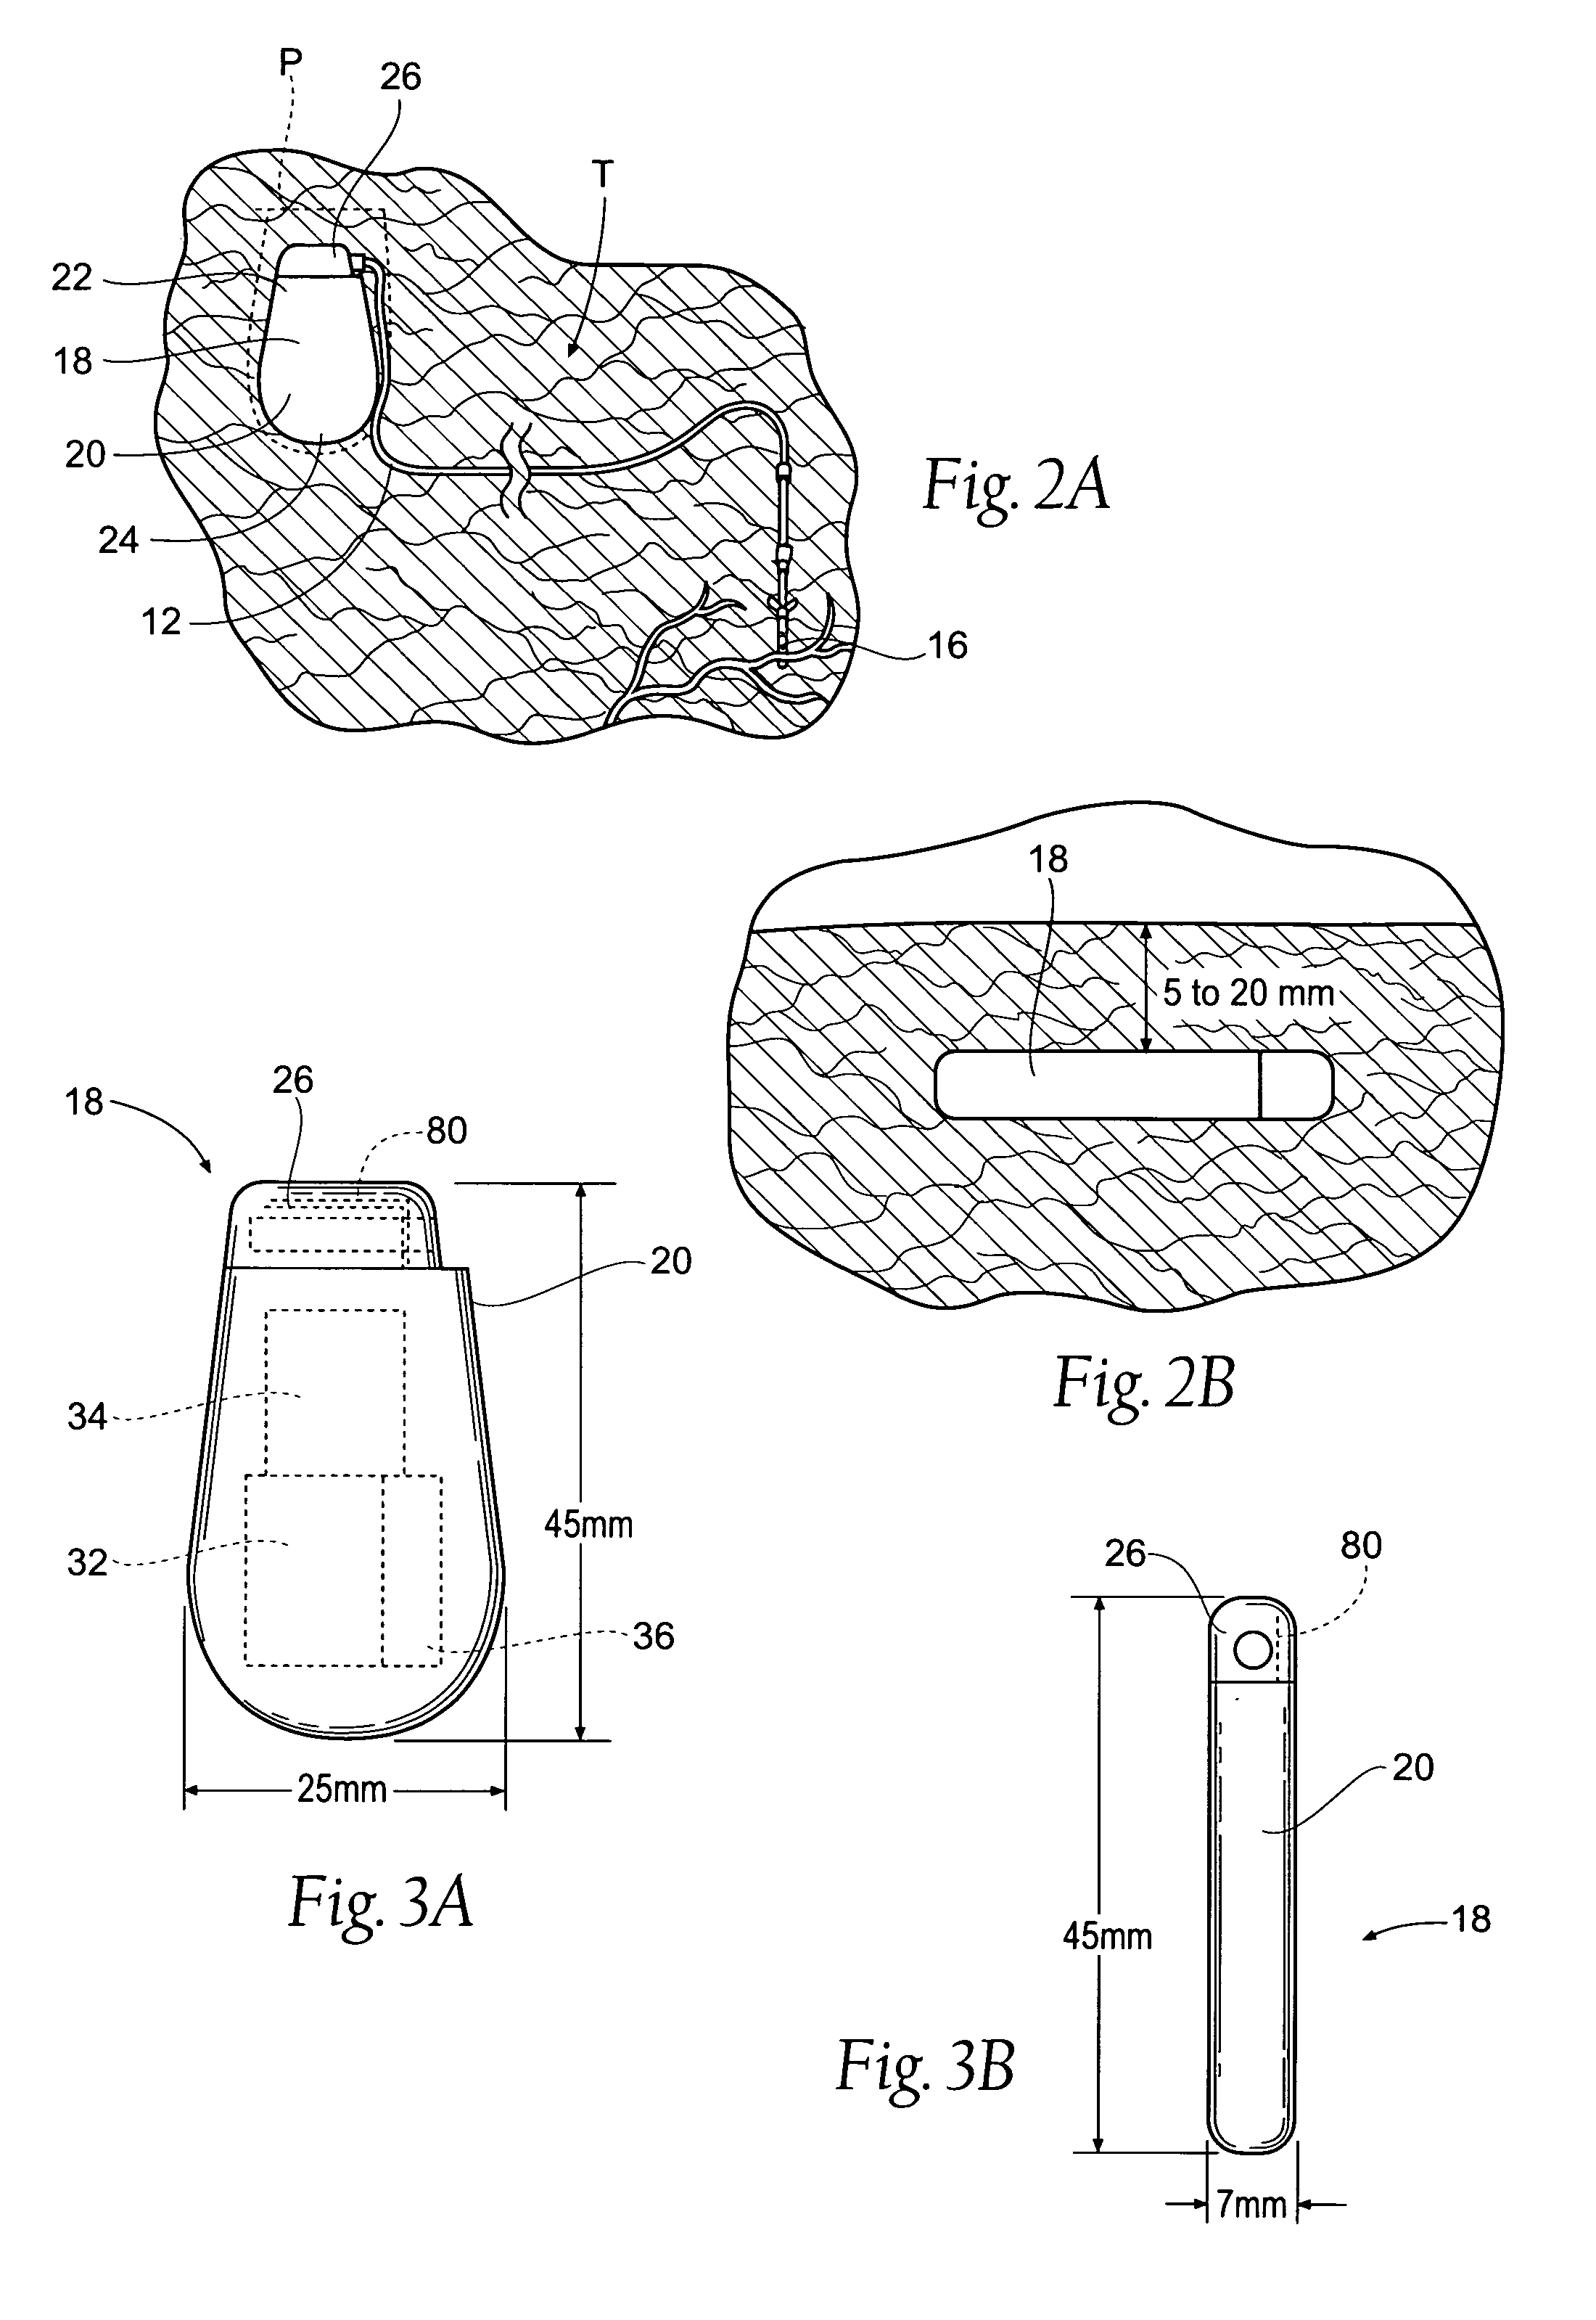 Implantable pulse generator systems and methods for providing functional and/or therapeutic stimulation of muscles and/or nerves and/or central nervous system tissue